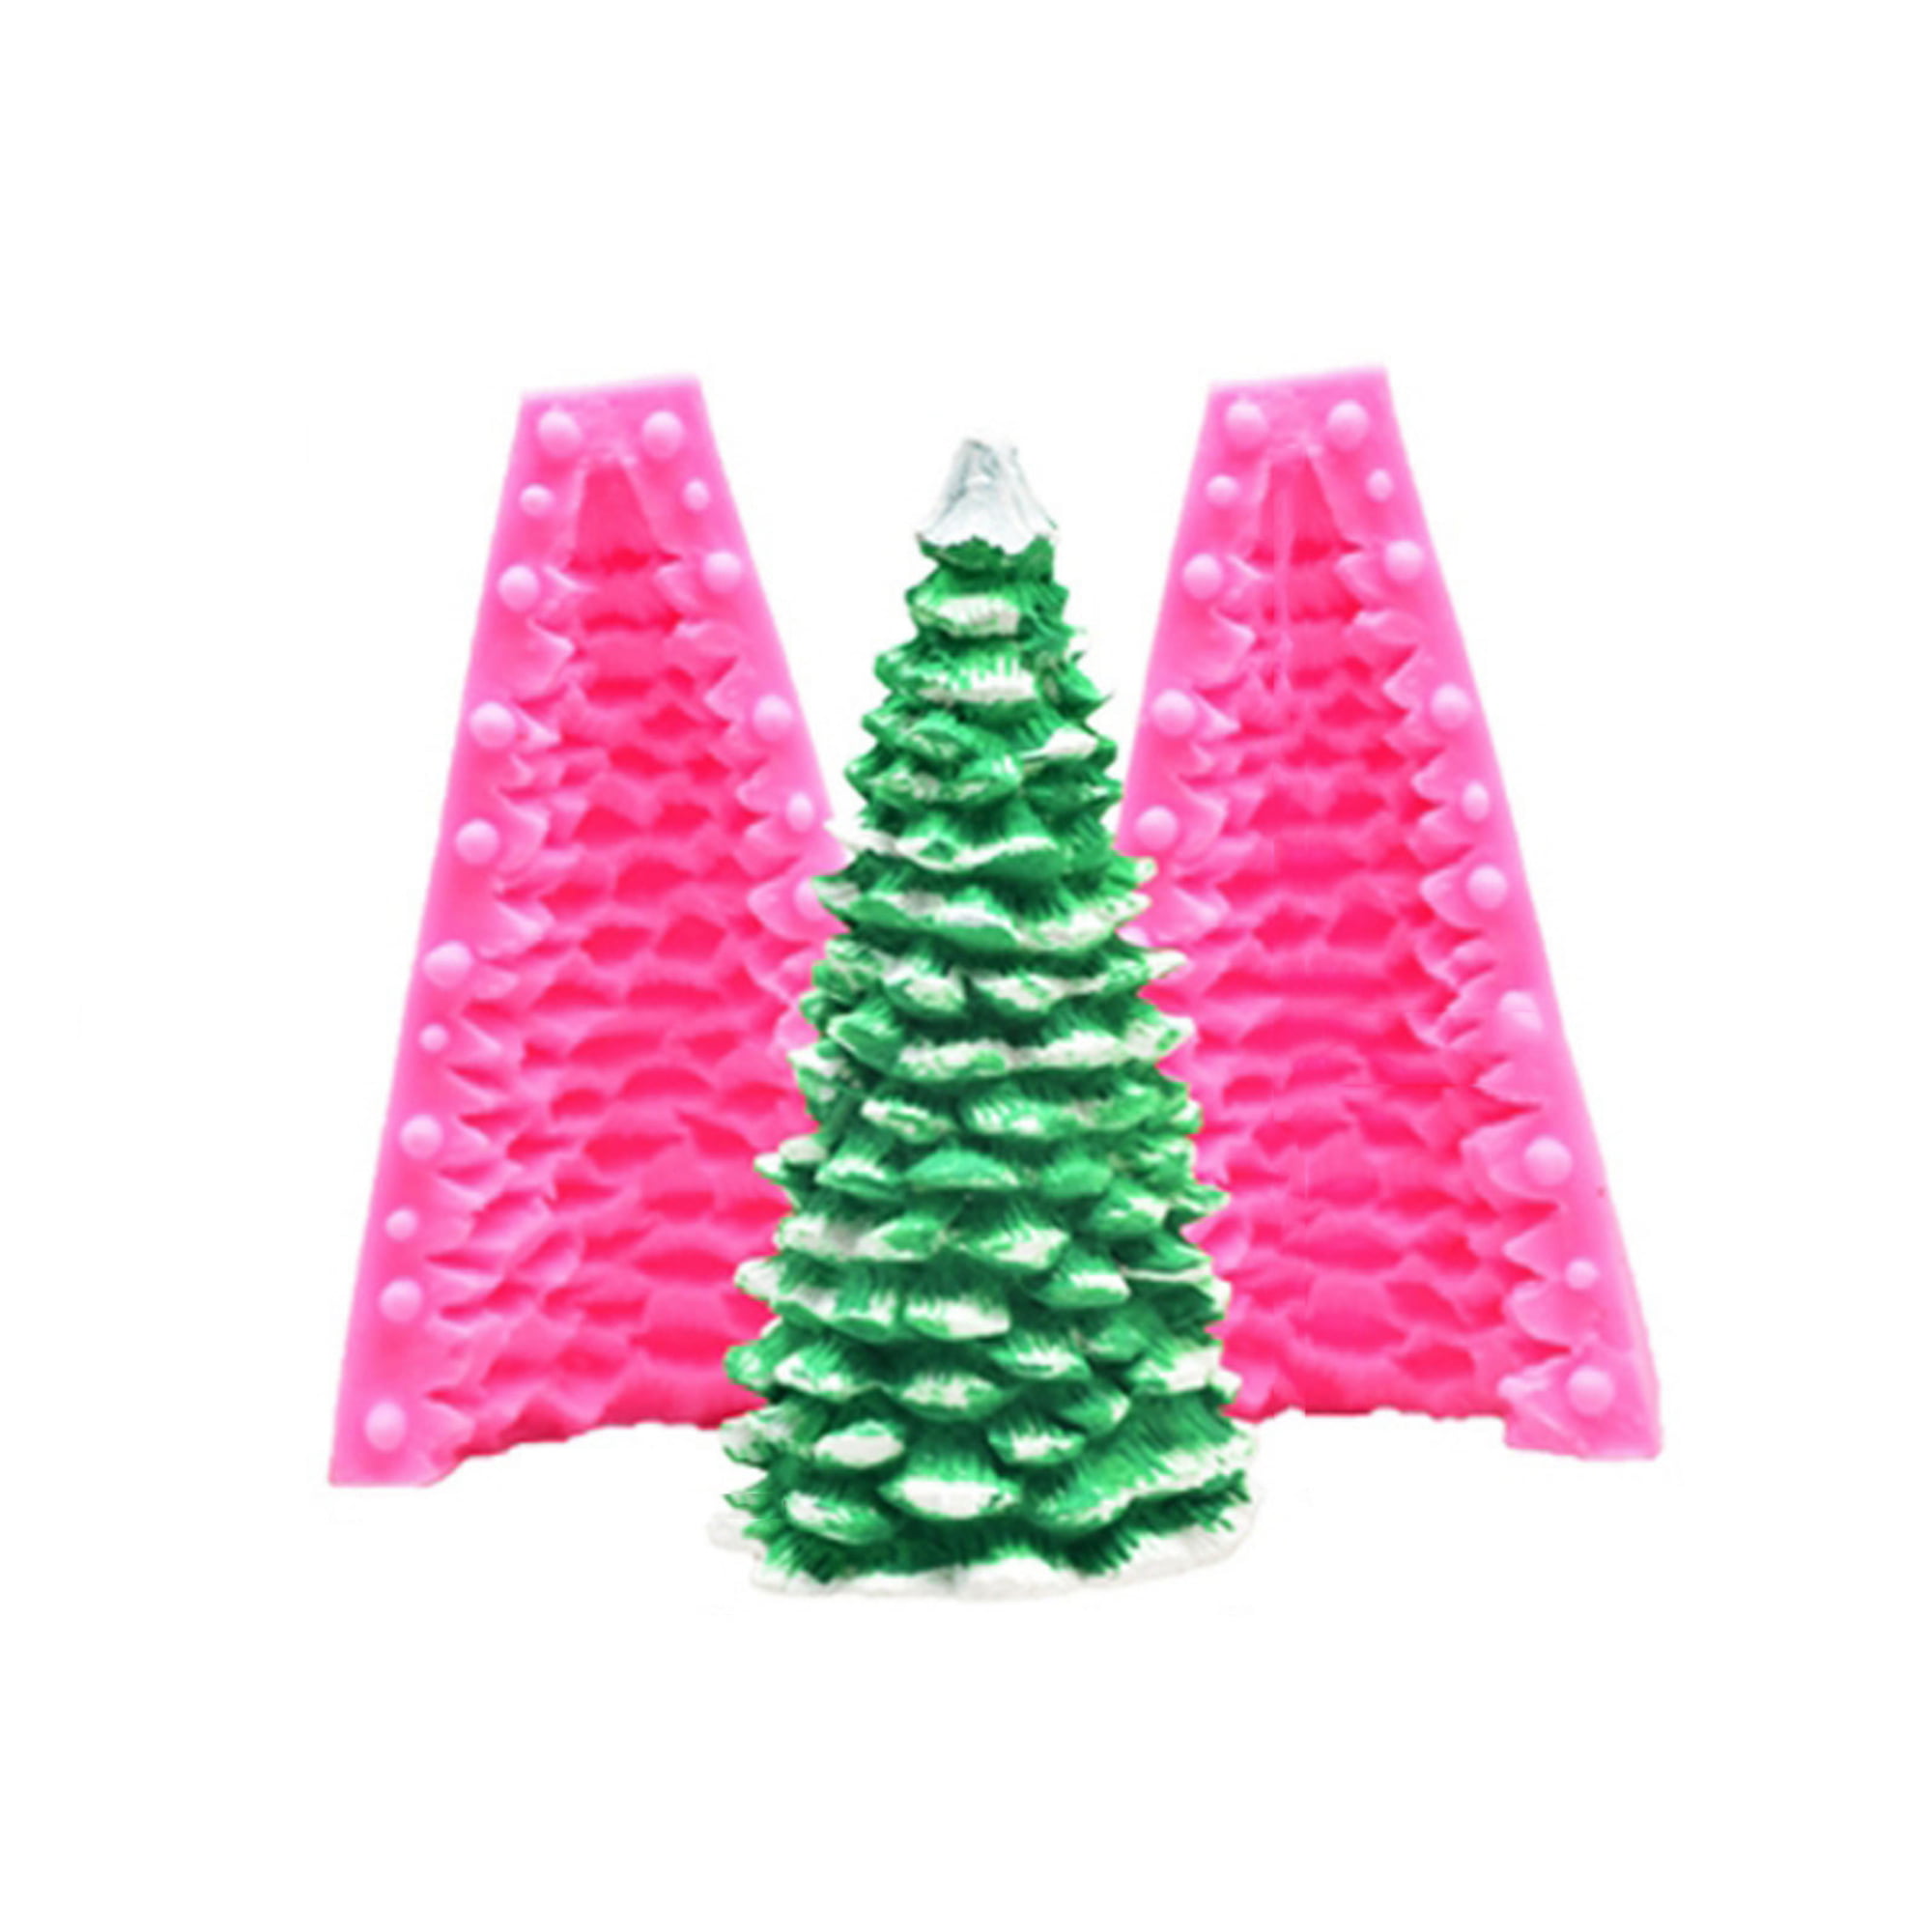 Details about   Portable Cookie Biscuit Cutter Christmas Tree Shape Designed Baking Accessories